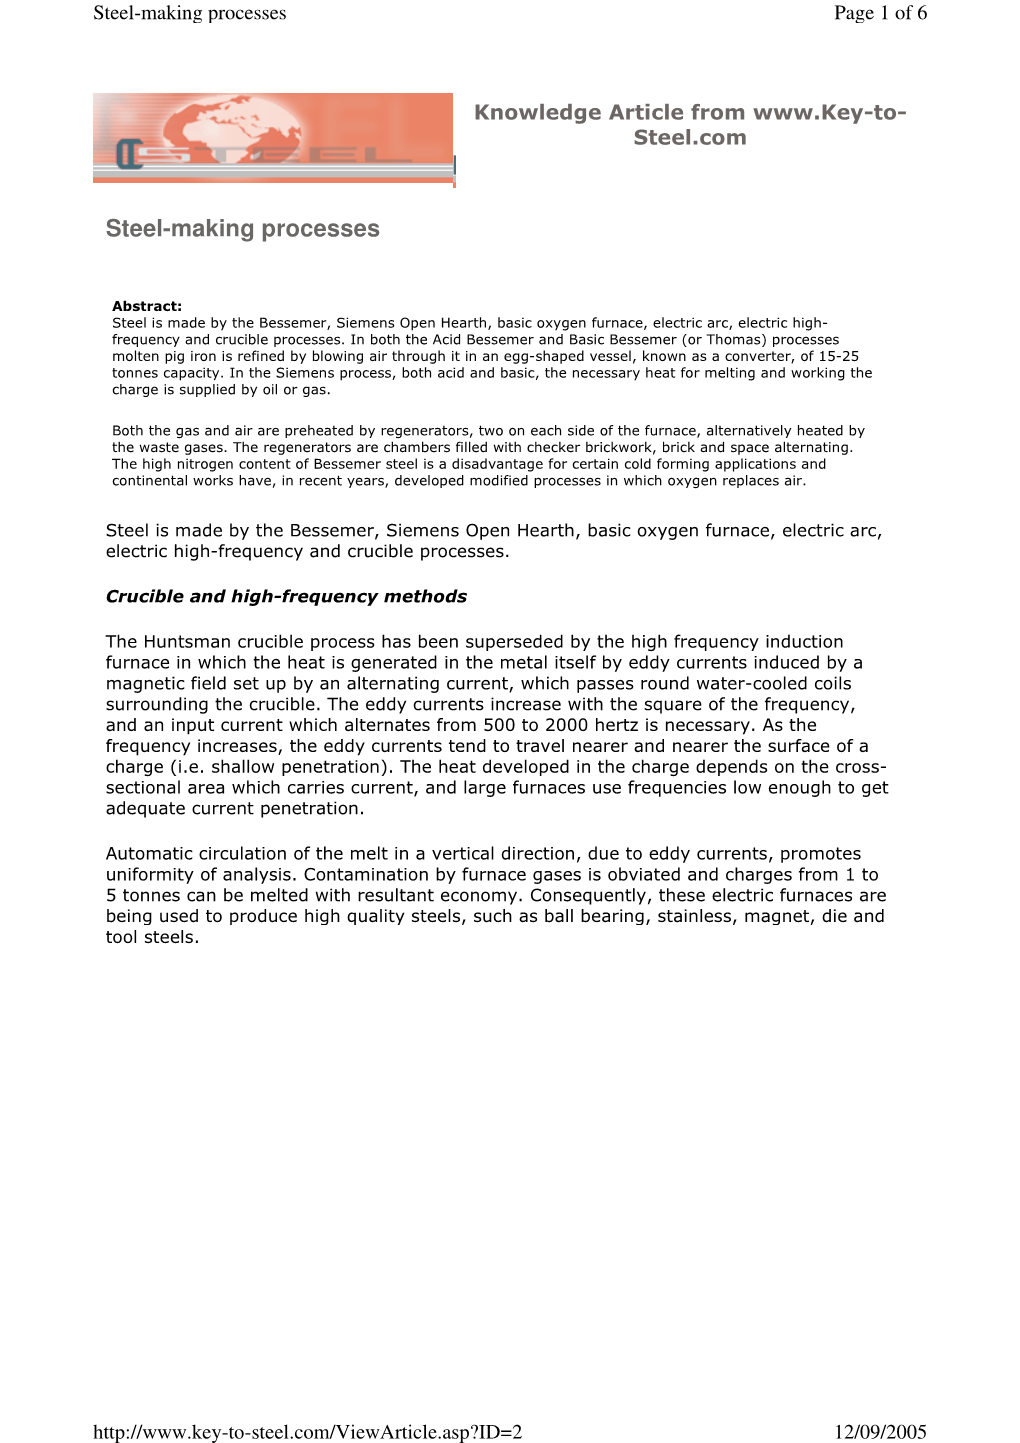 Steel-Making Processes Page 1 of 6